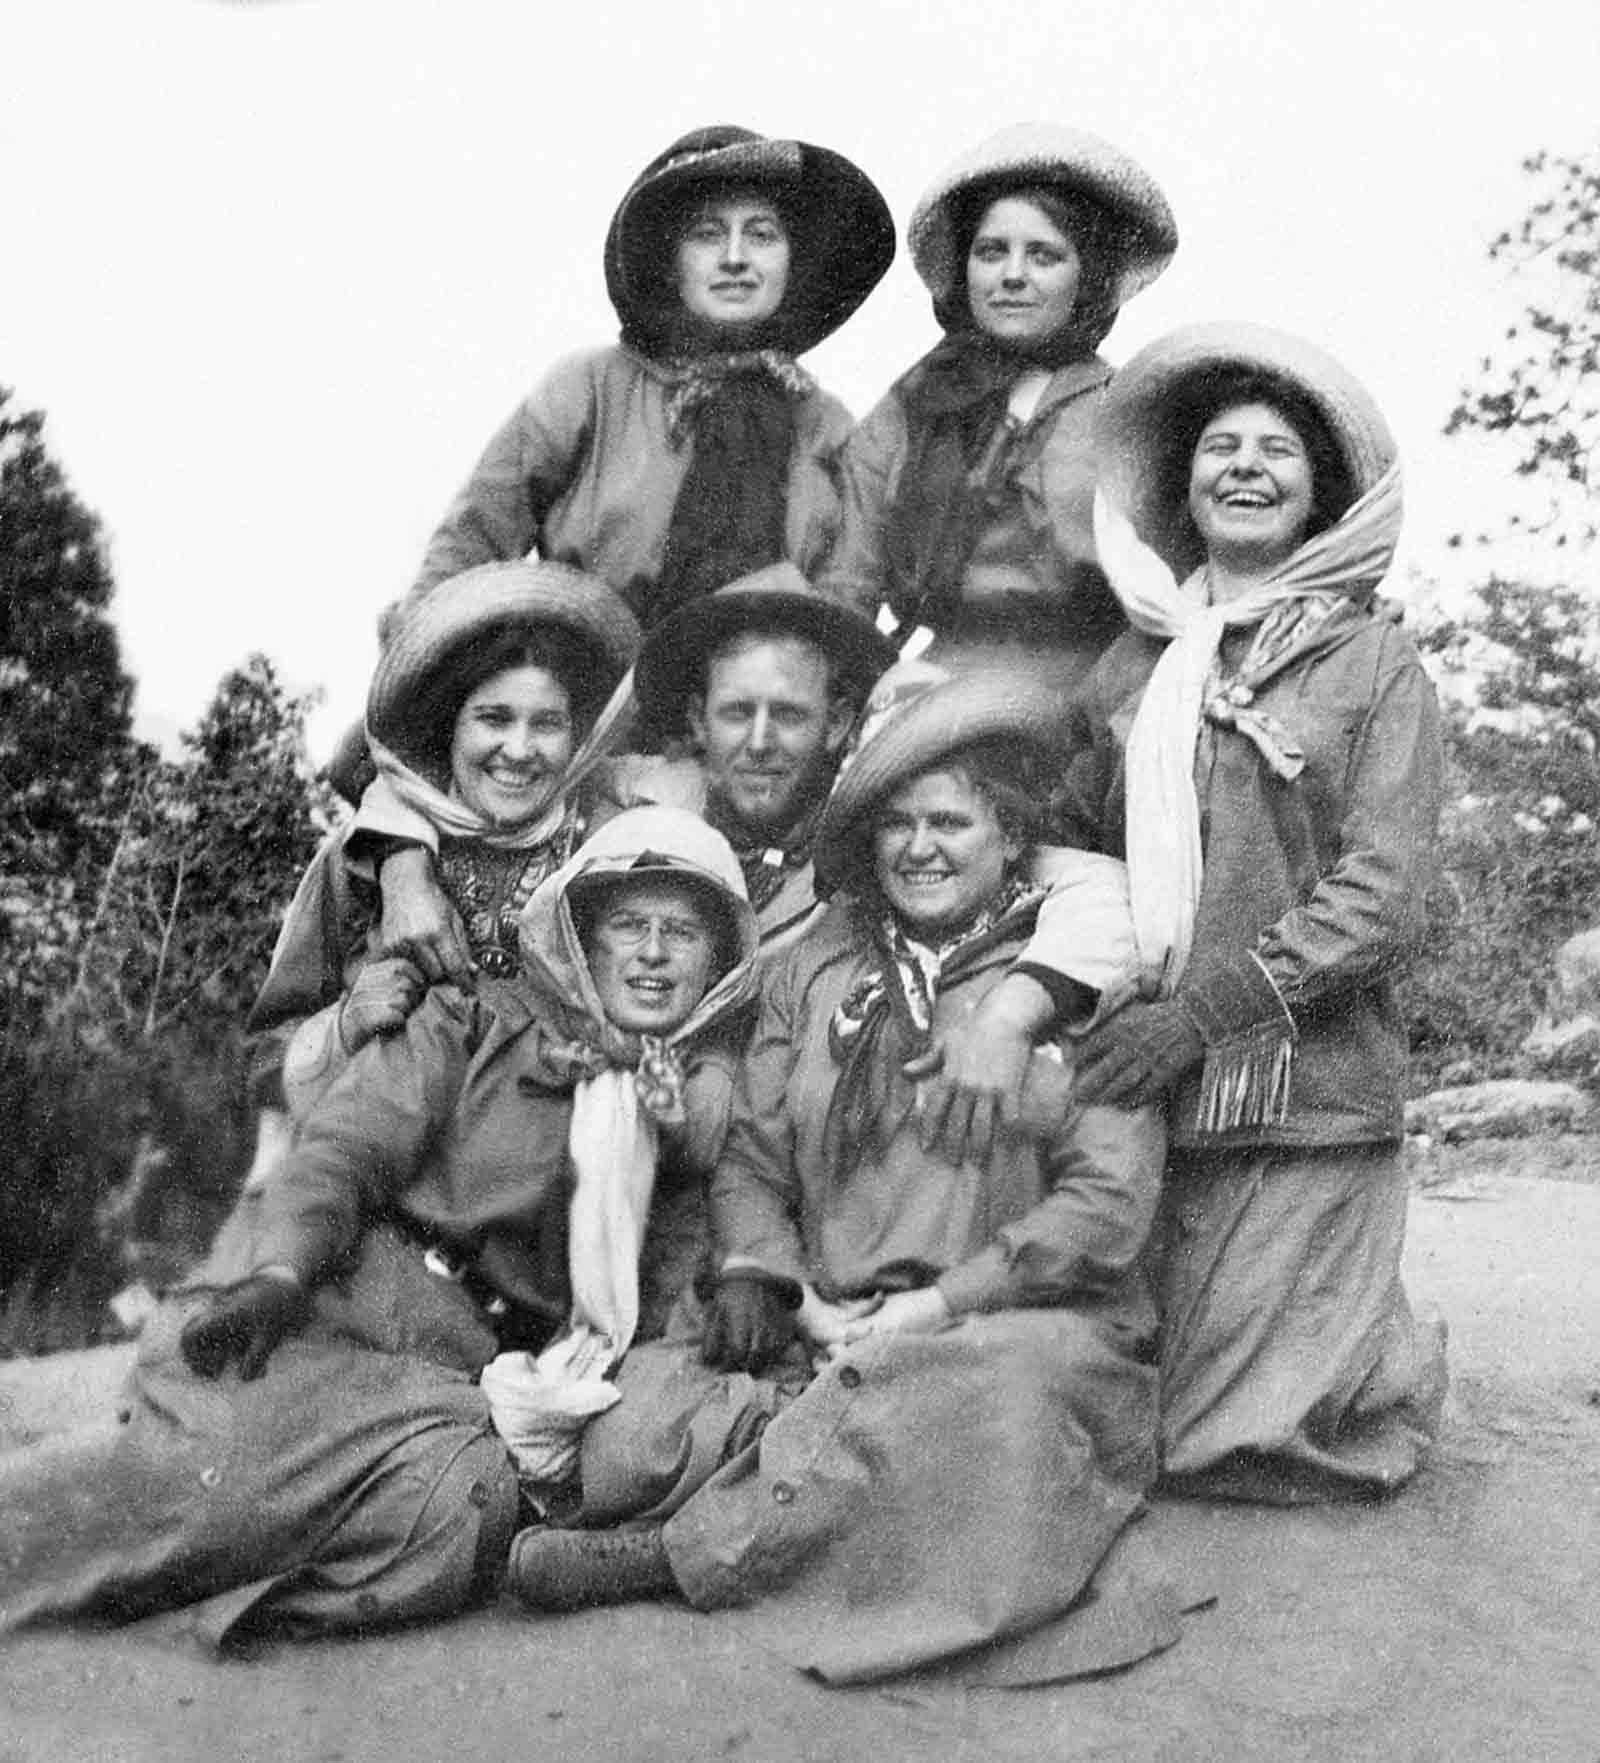 A group of Yosemite tourists and their guide, 1900.